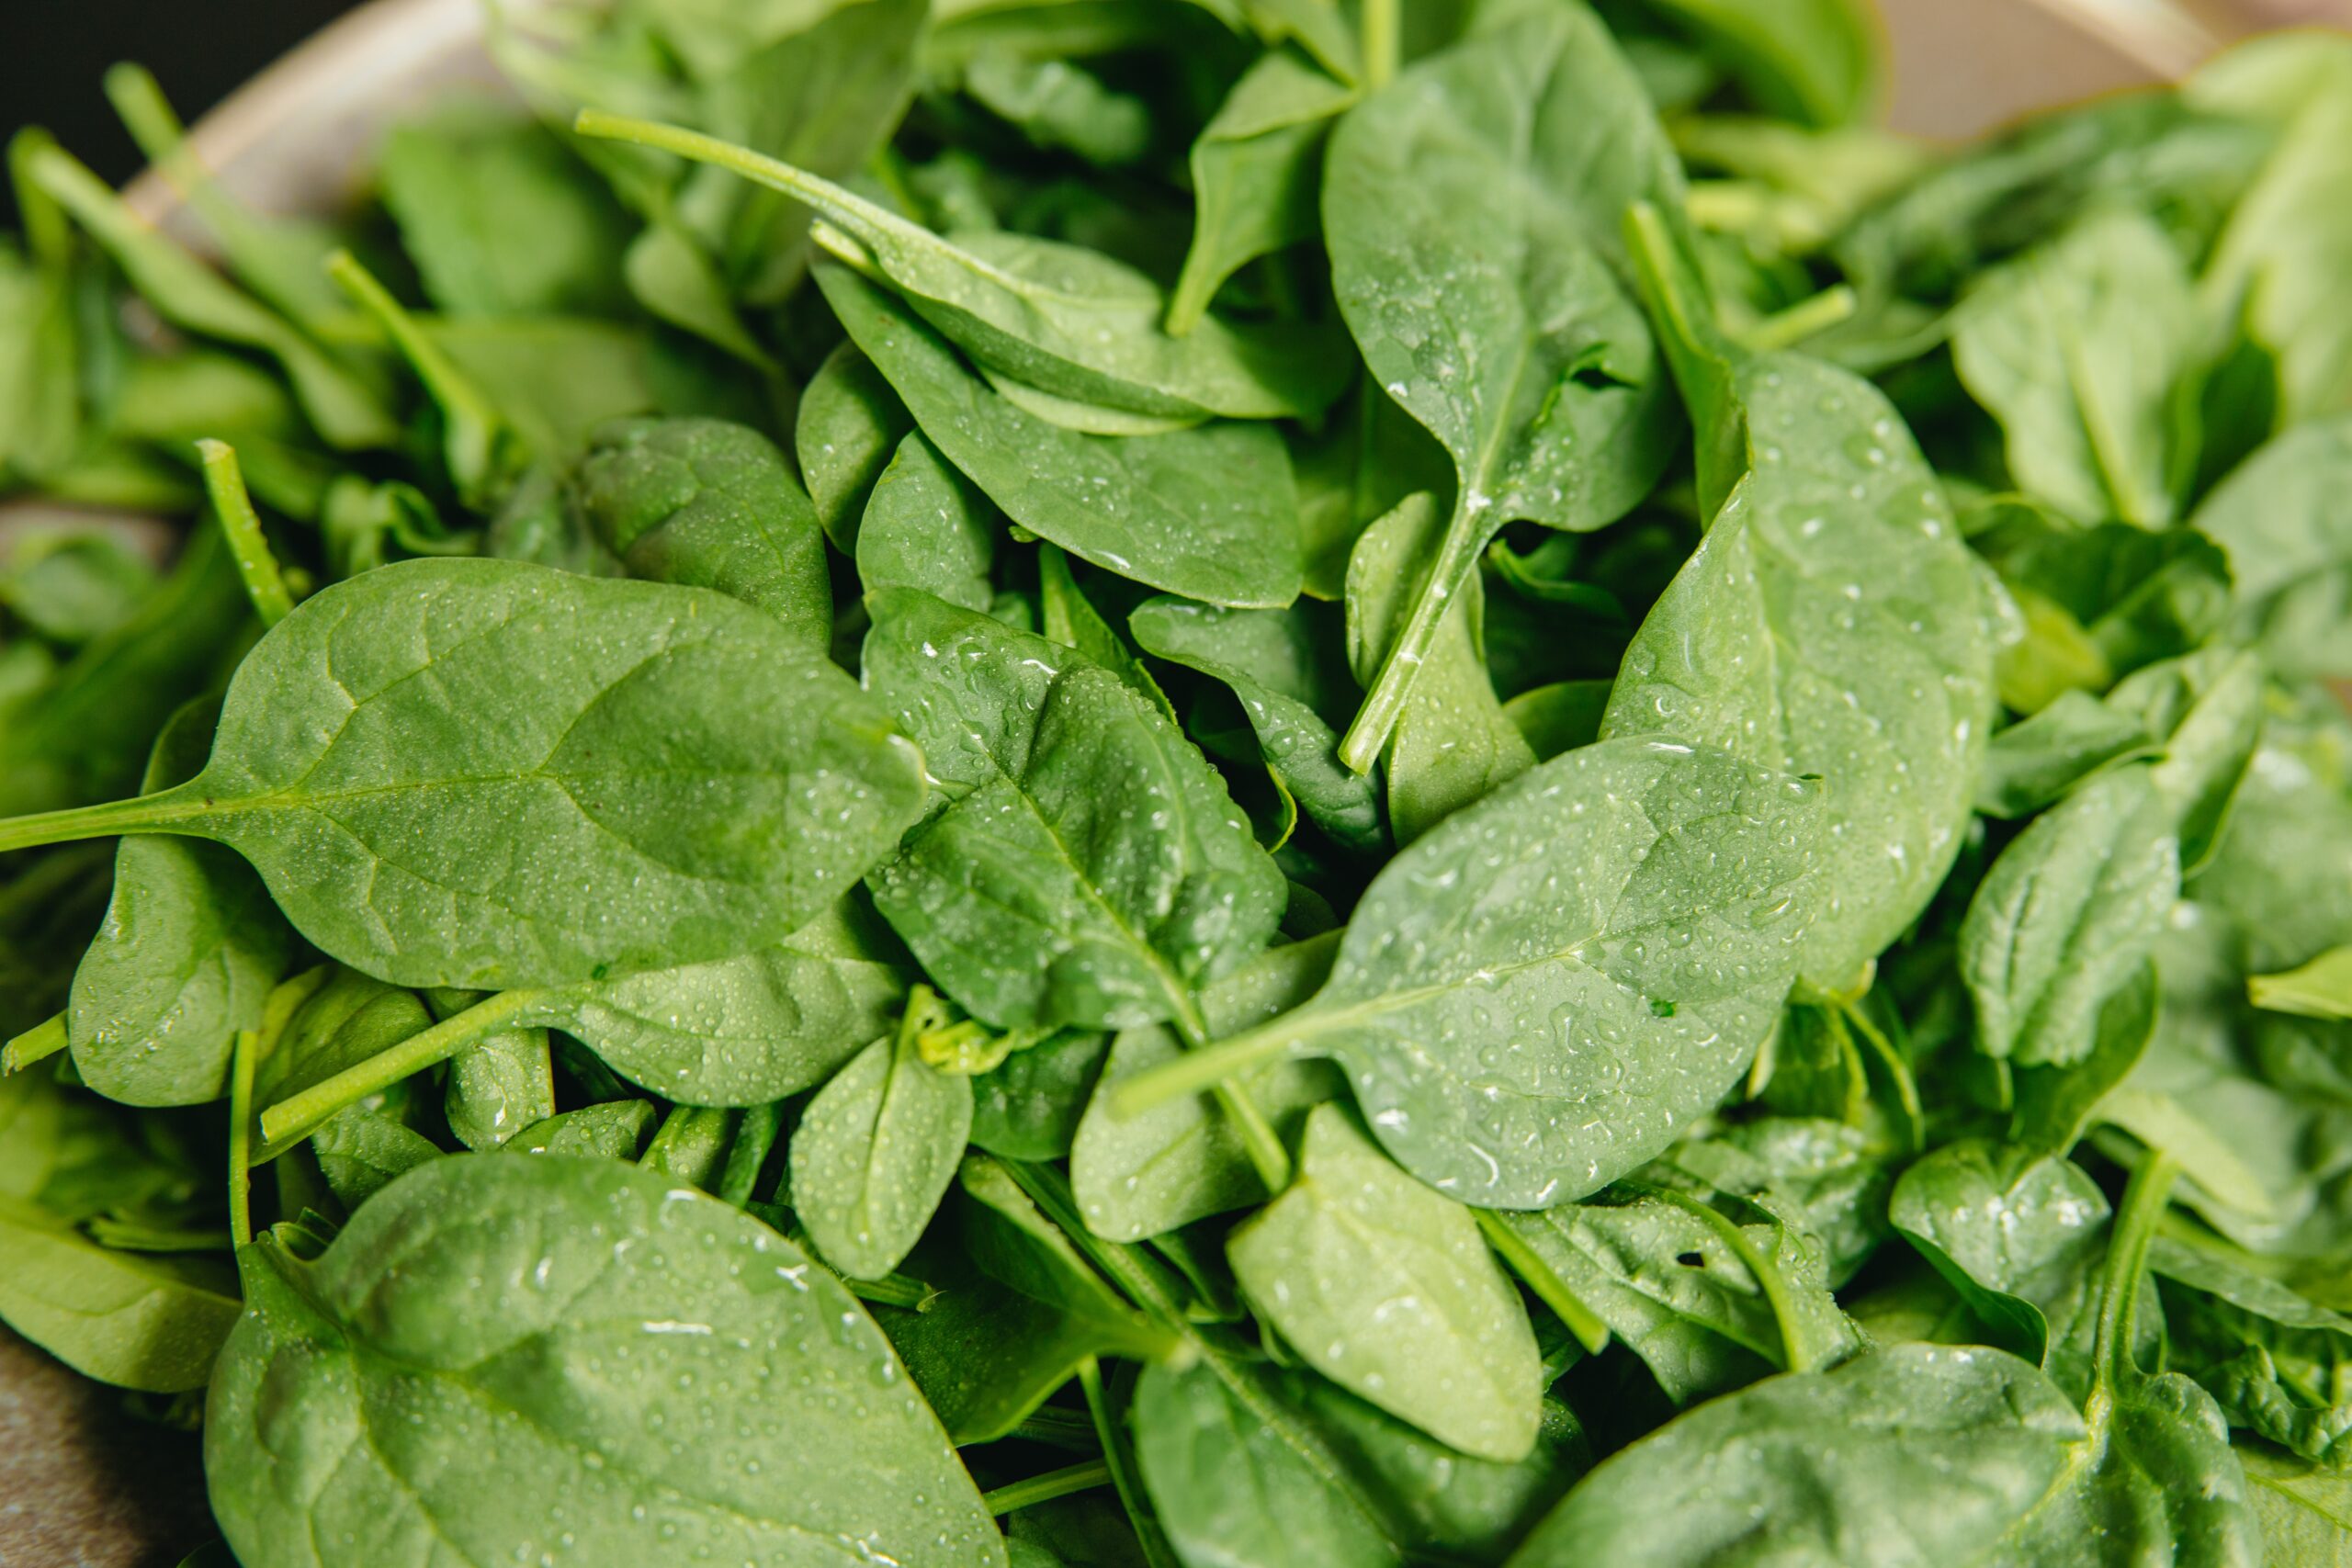 Top Companion Plants For Spinach - Spinach Inter-cropping